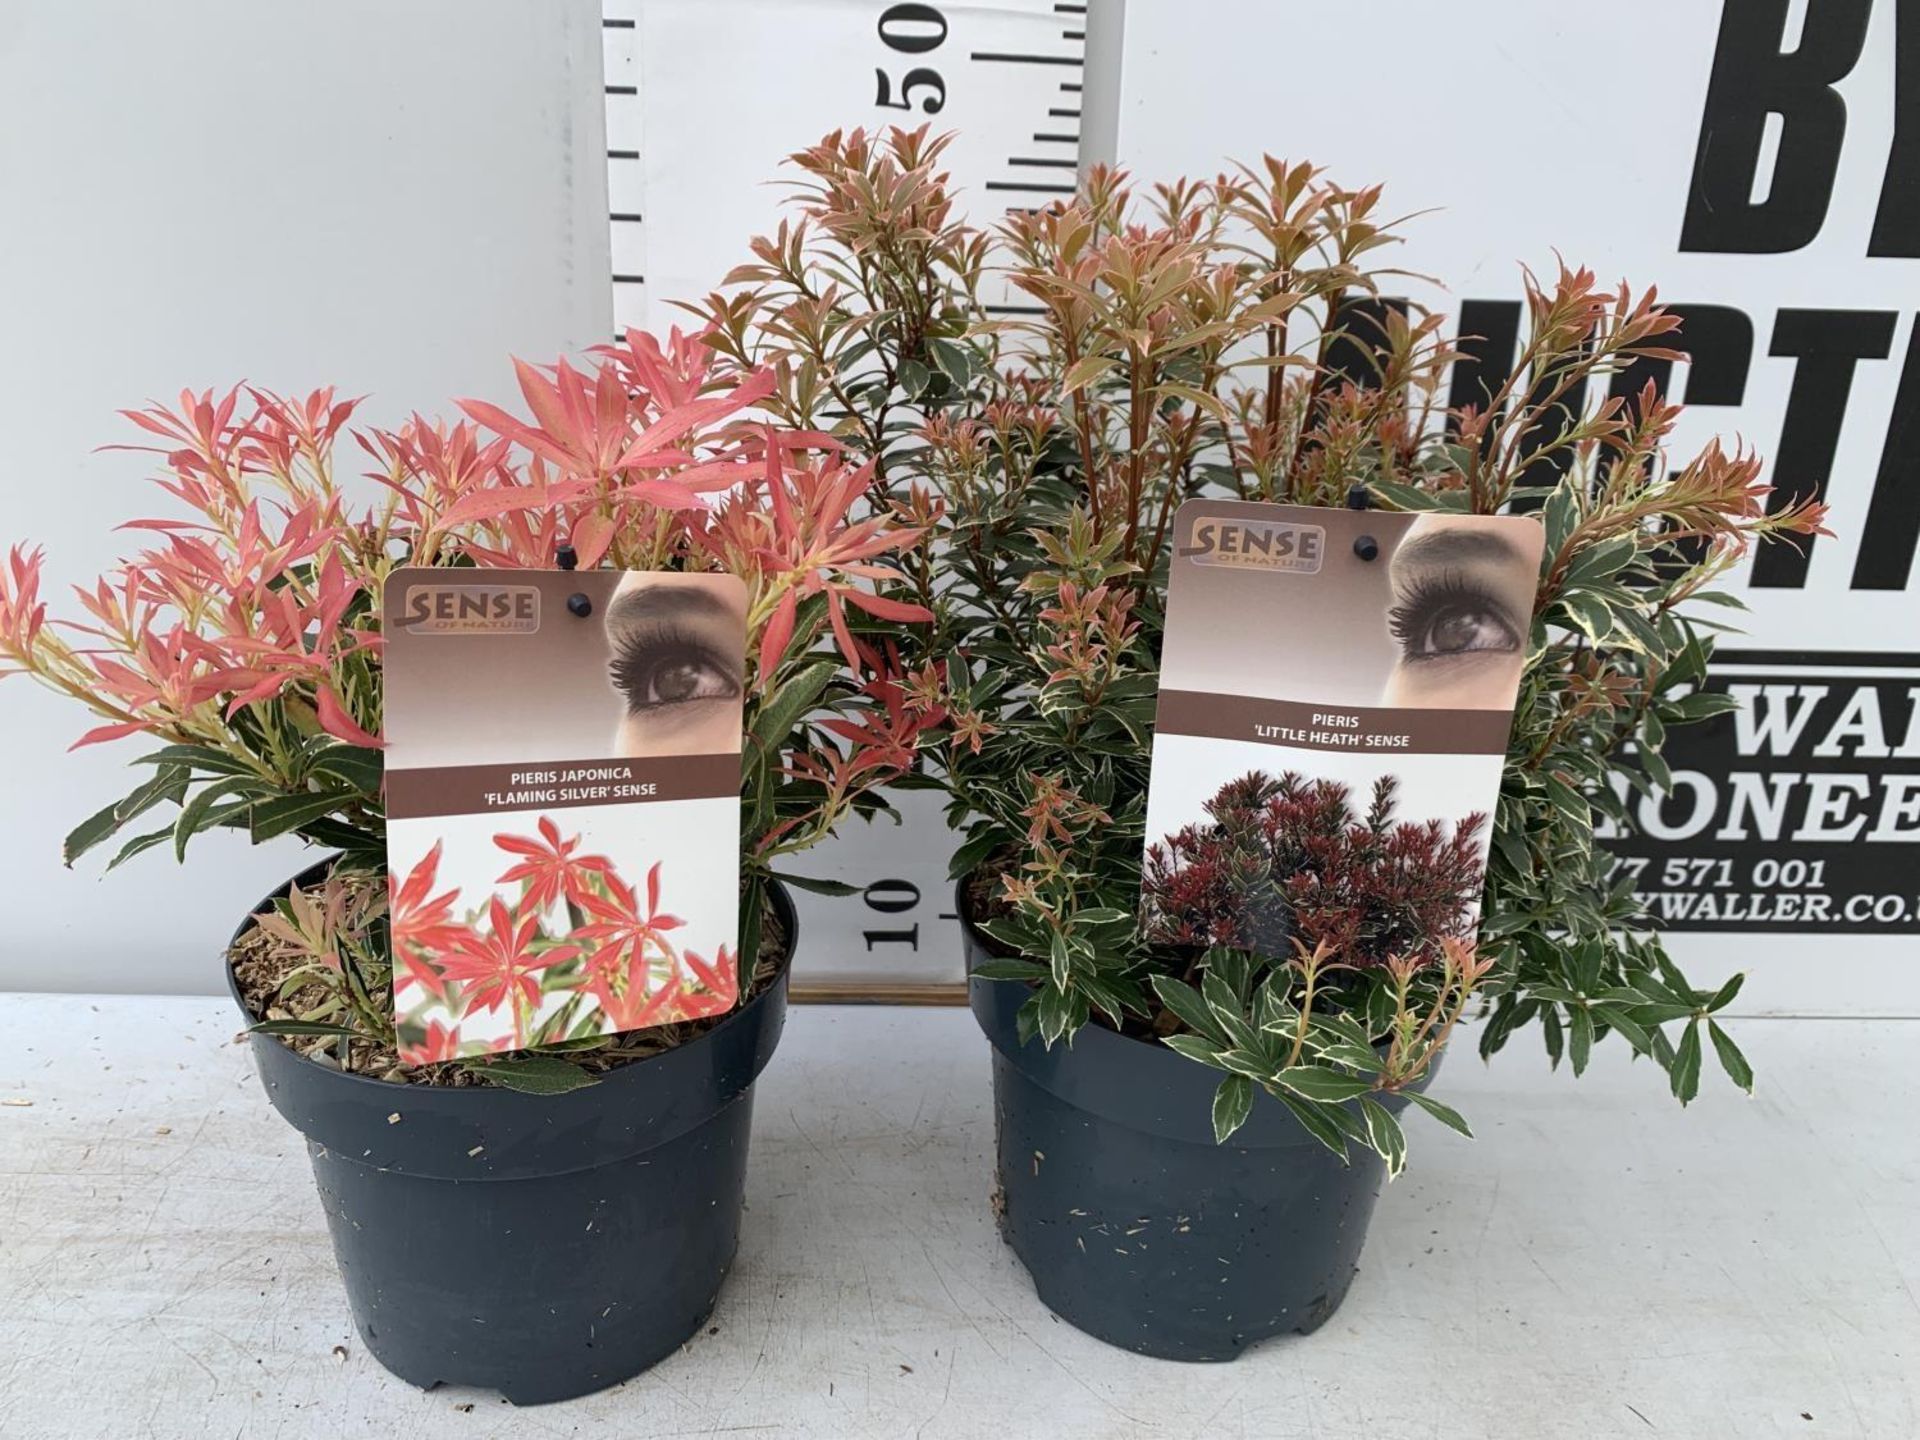 TWO PIERIS JAPONICA LITTLE HEATH AND FLAMING SILVER IN 3 LTR POTS 45CM TALL PLUS VAT TO BE SOLD - Image 6 of 10